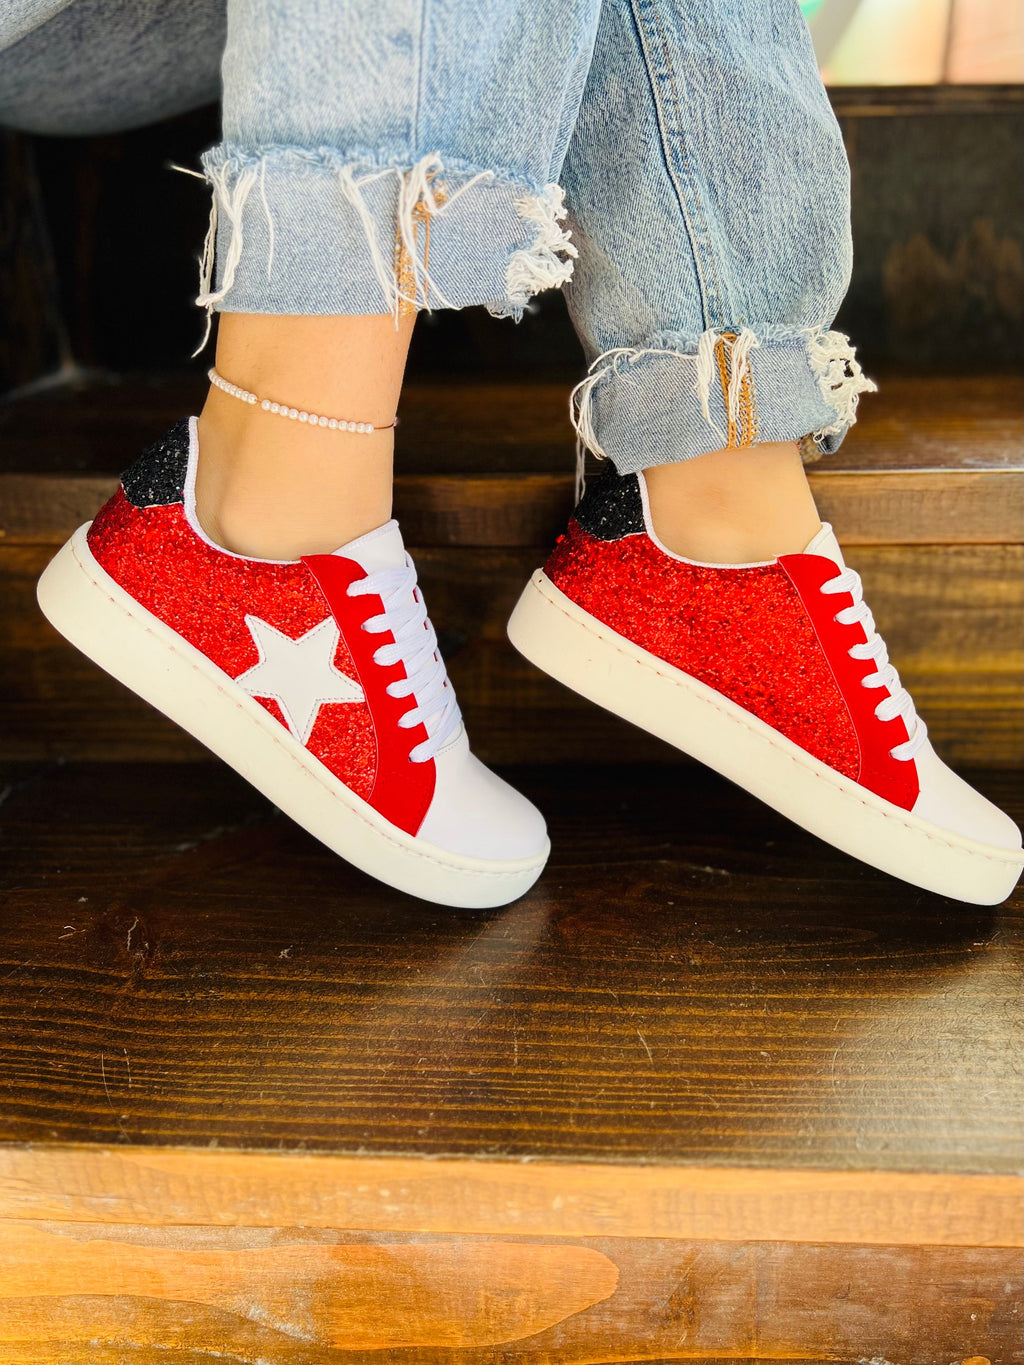 Red & Black Sparkling Game Day Sneakers | gussieduponline